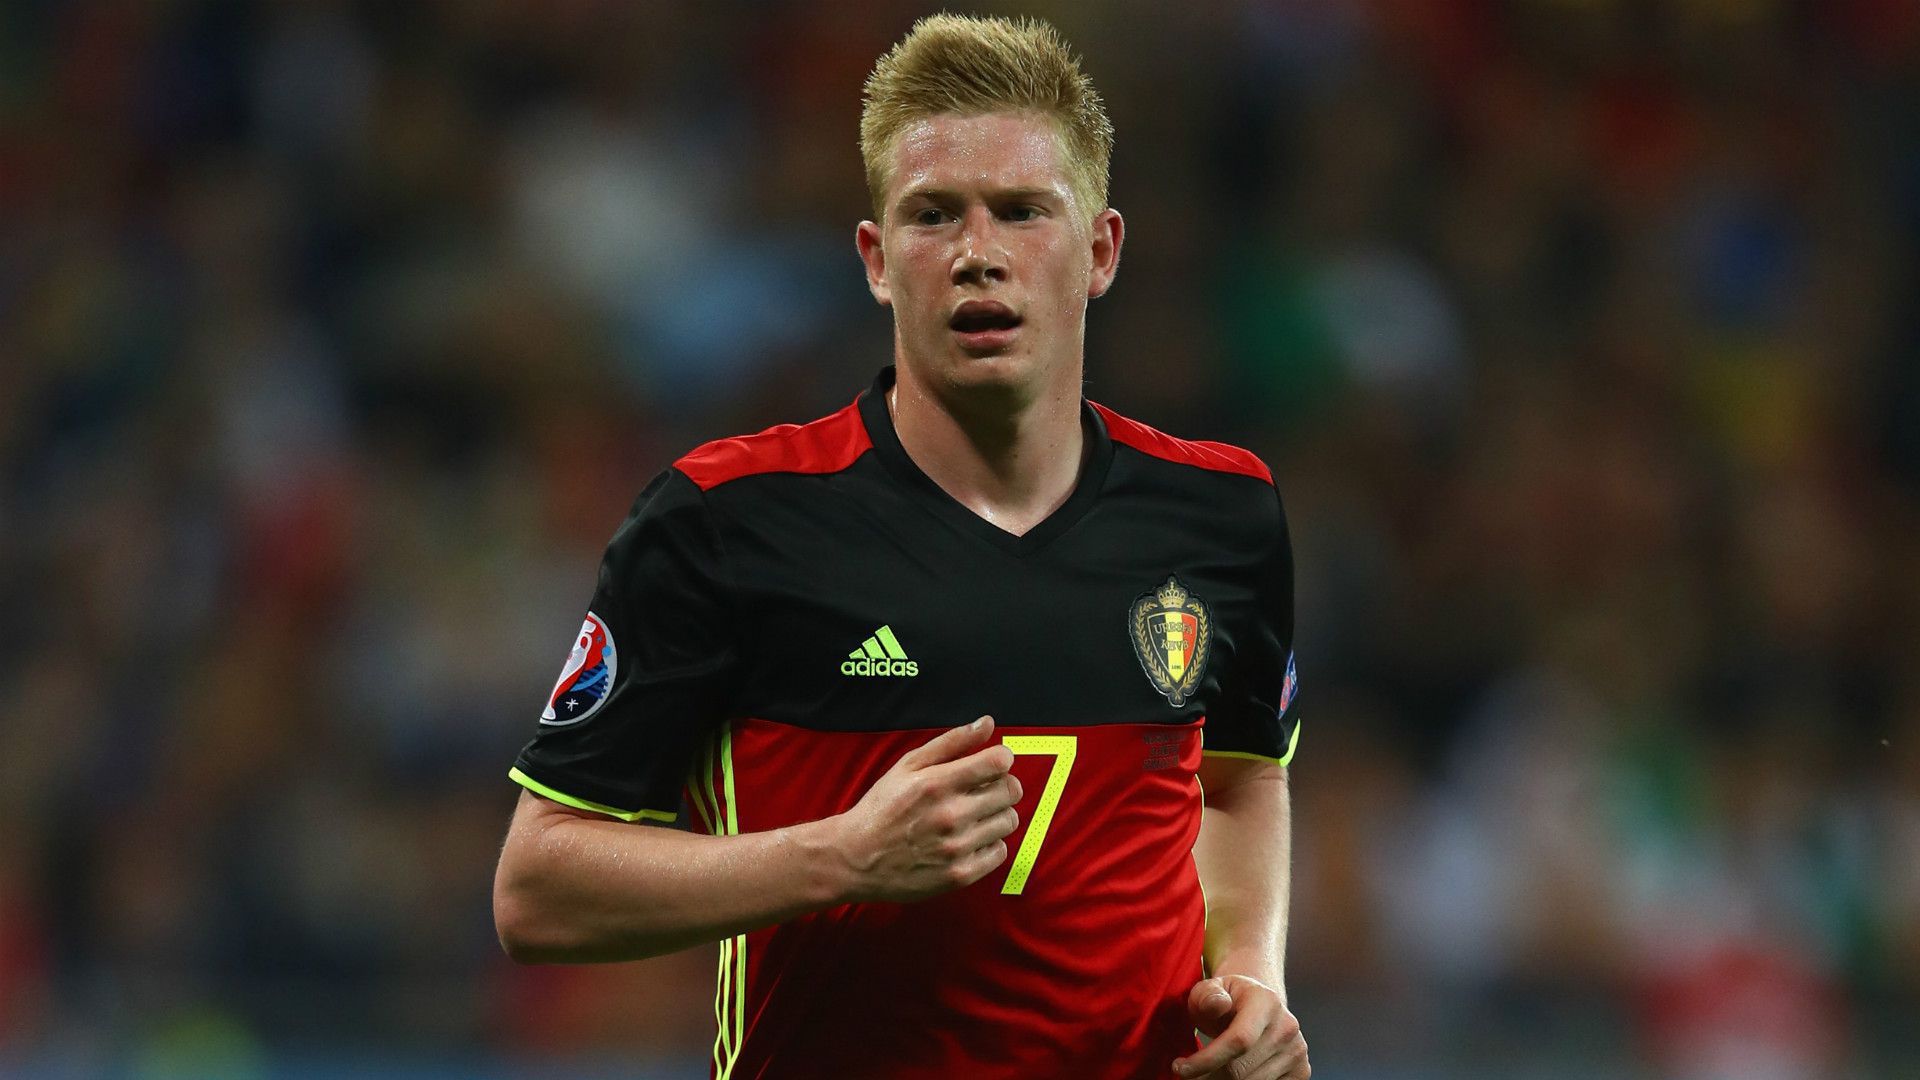 Kevin De Bruyne Wallpaper Image Photos Pictures Background